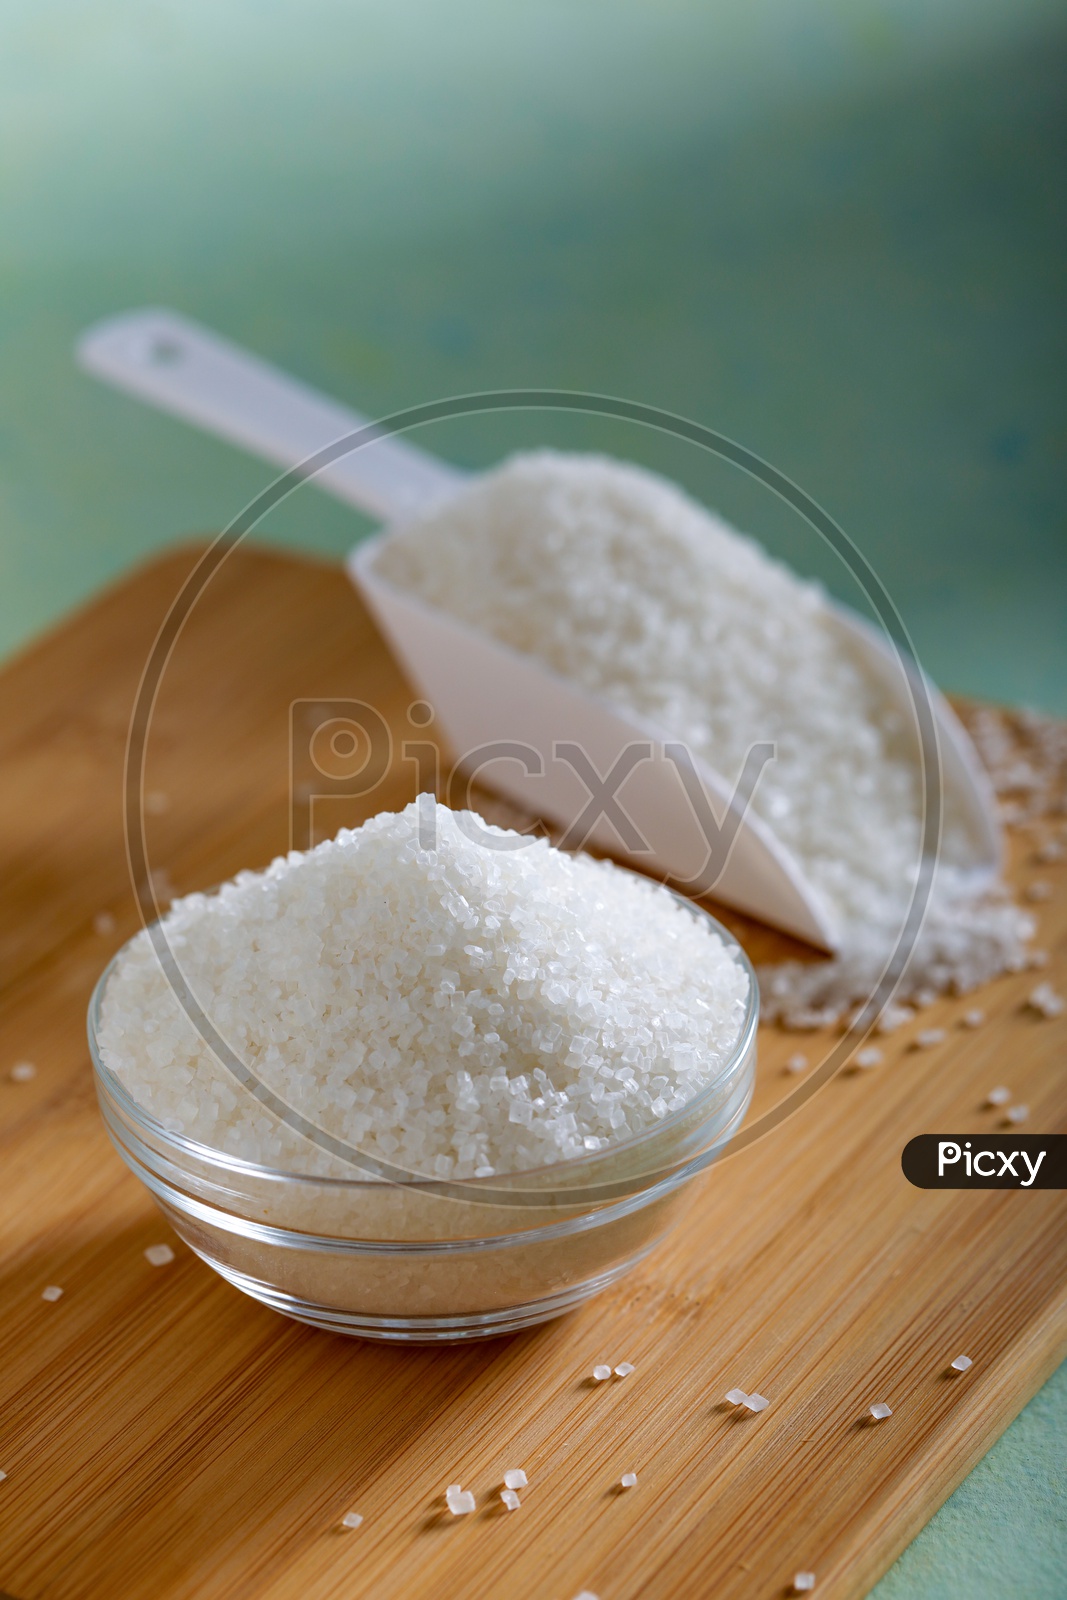 Sugar in a Glass Bowl  On an Wooden Background